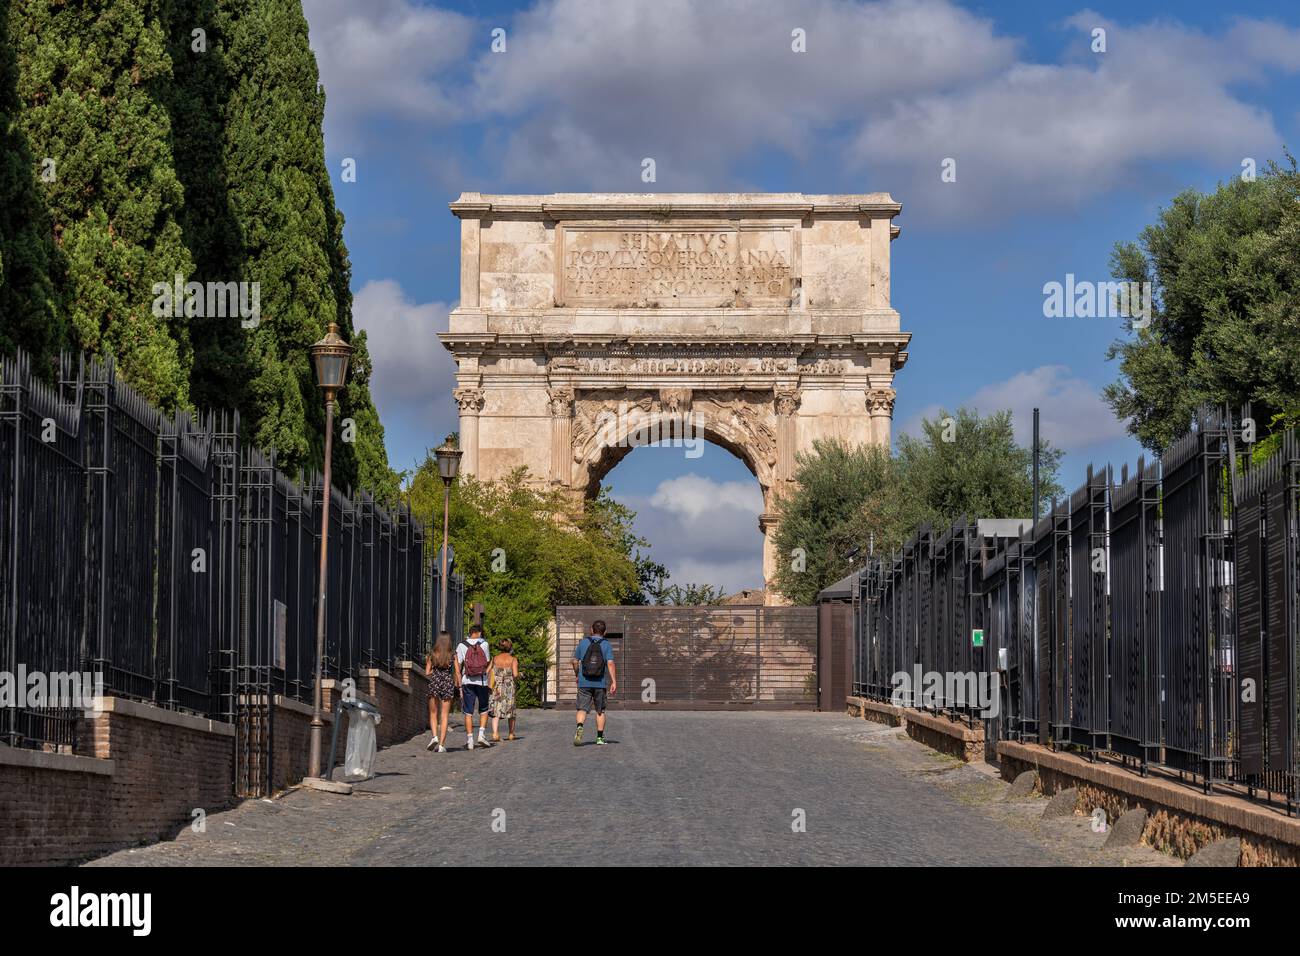 Rome, Italy, Arch of Titus (Italian: Arco di Tito; Latin: Arcus Titi) at the entrance to Roman Forum, ancient city landmark built in AD 81 by the Empe Stock Photo